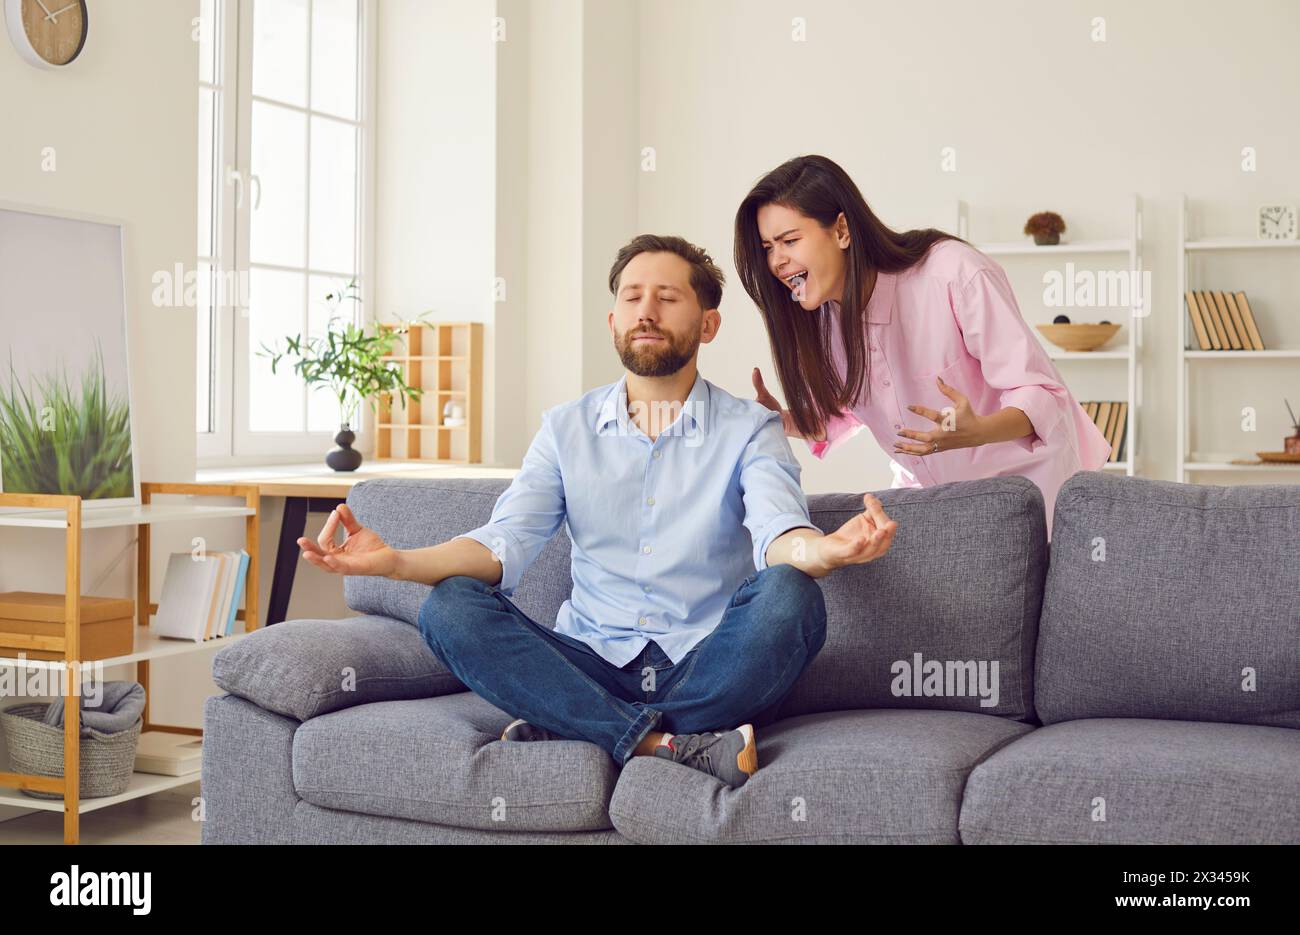 Angry woman quarrels and shouts at man who is sitting in meditative position on sofa at home. Stock Photo